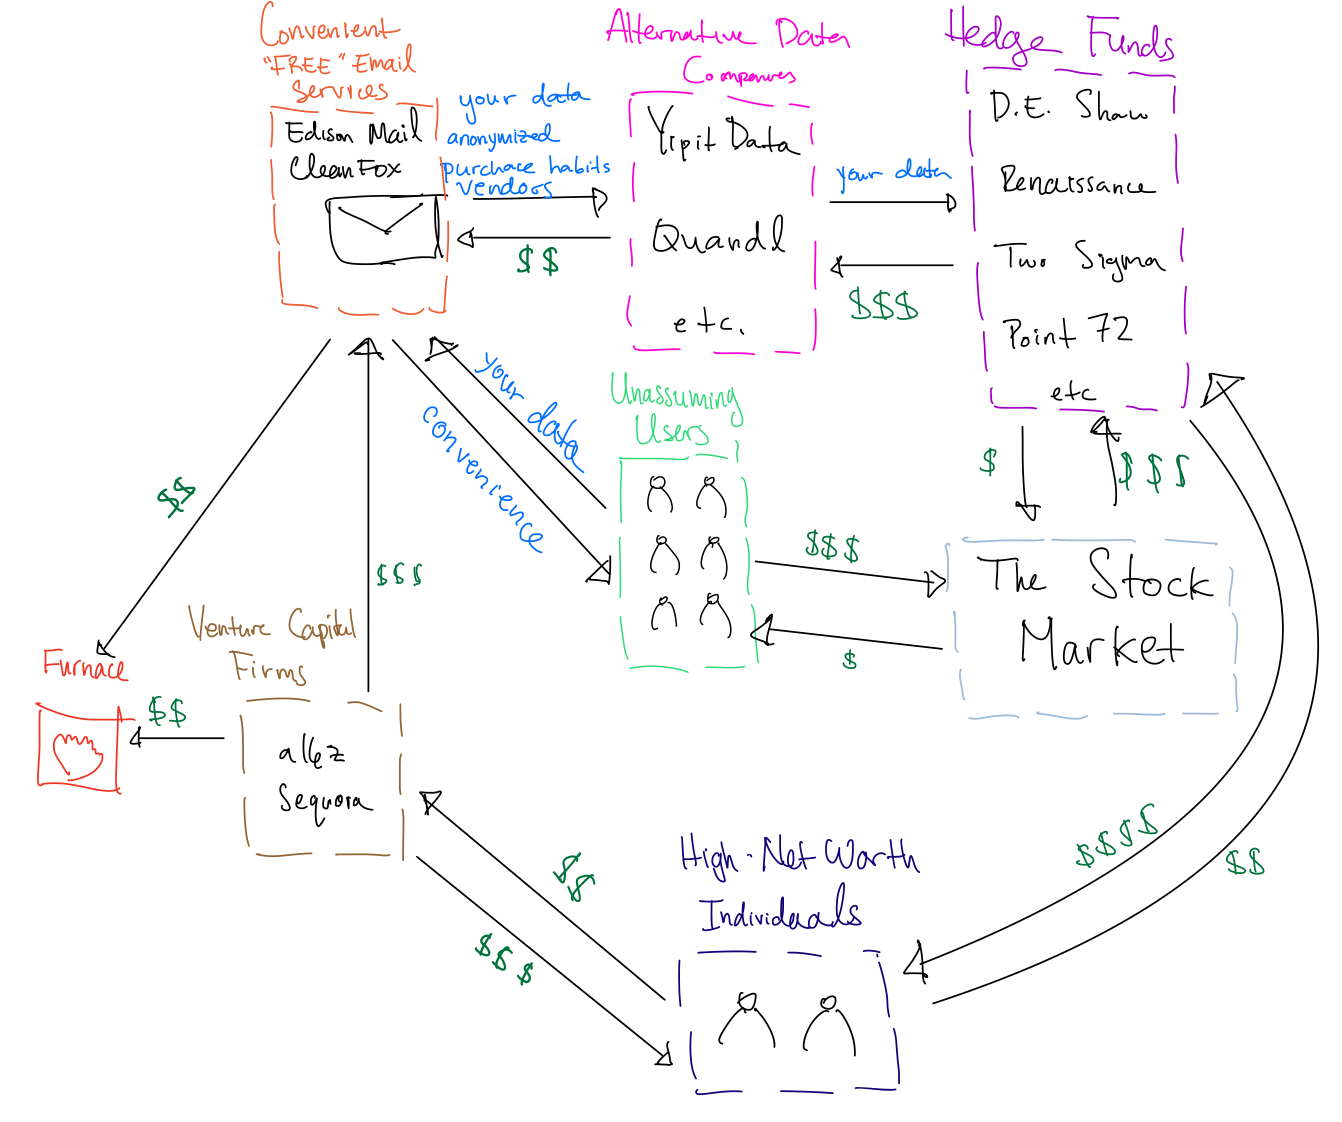 A hand-drawn diagram of how the money & data flows in the free-app-alternative-data-stock-market complex